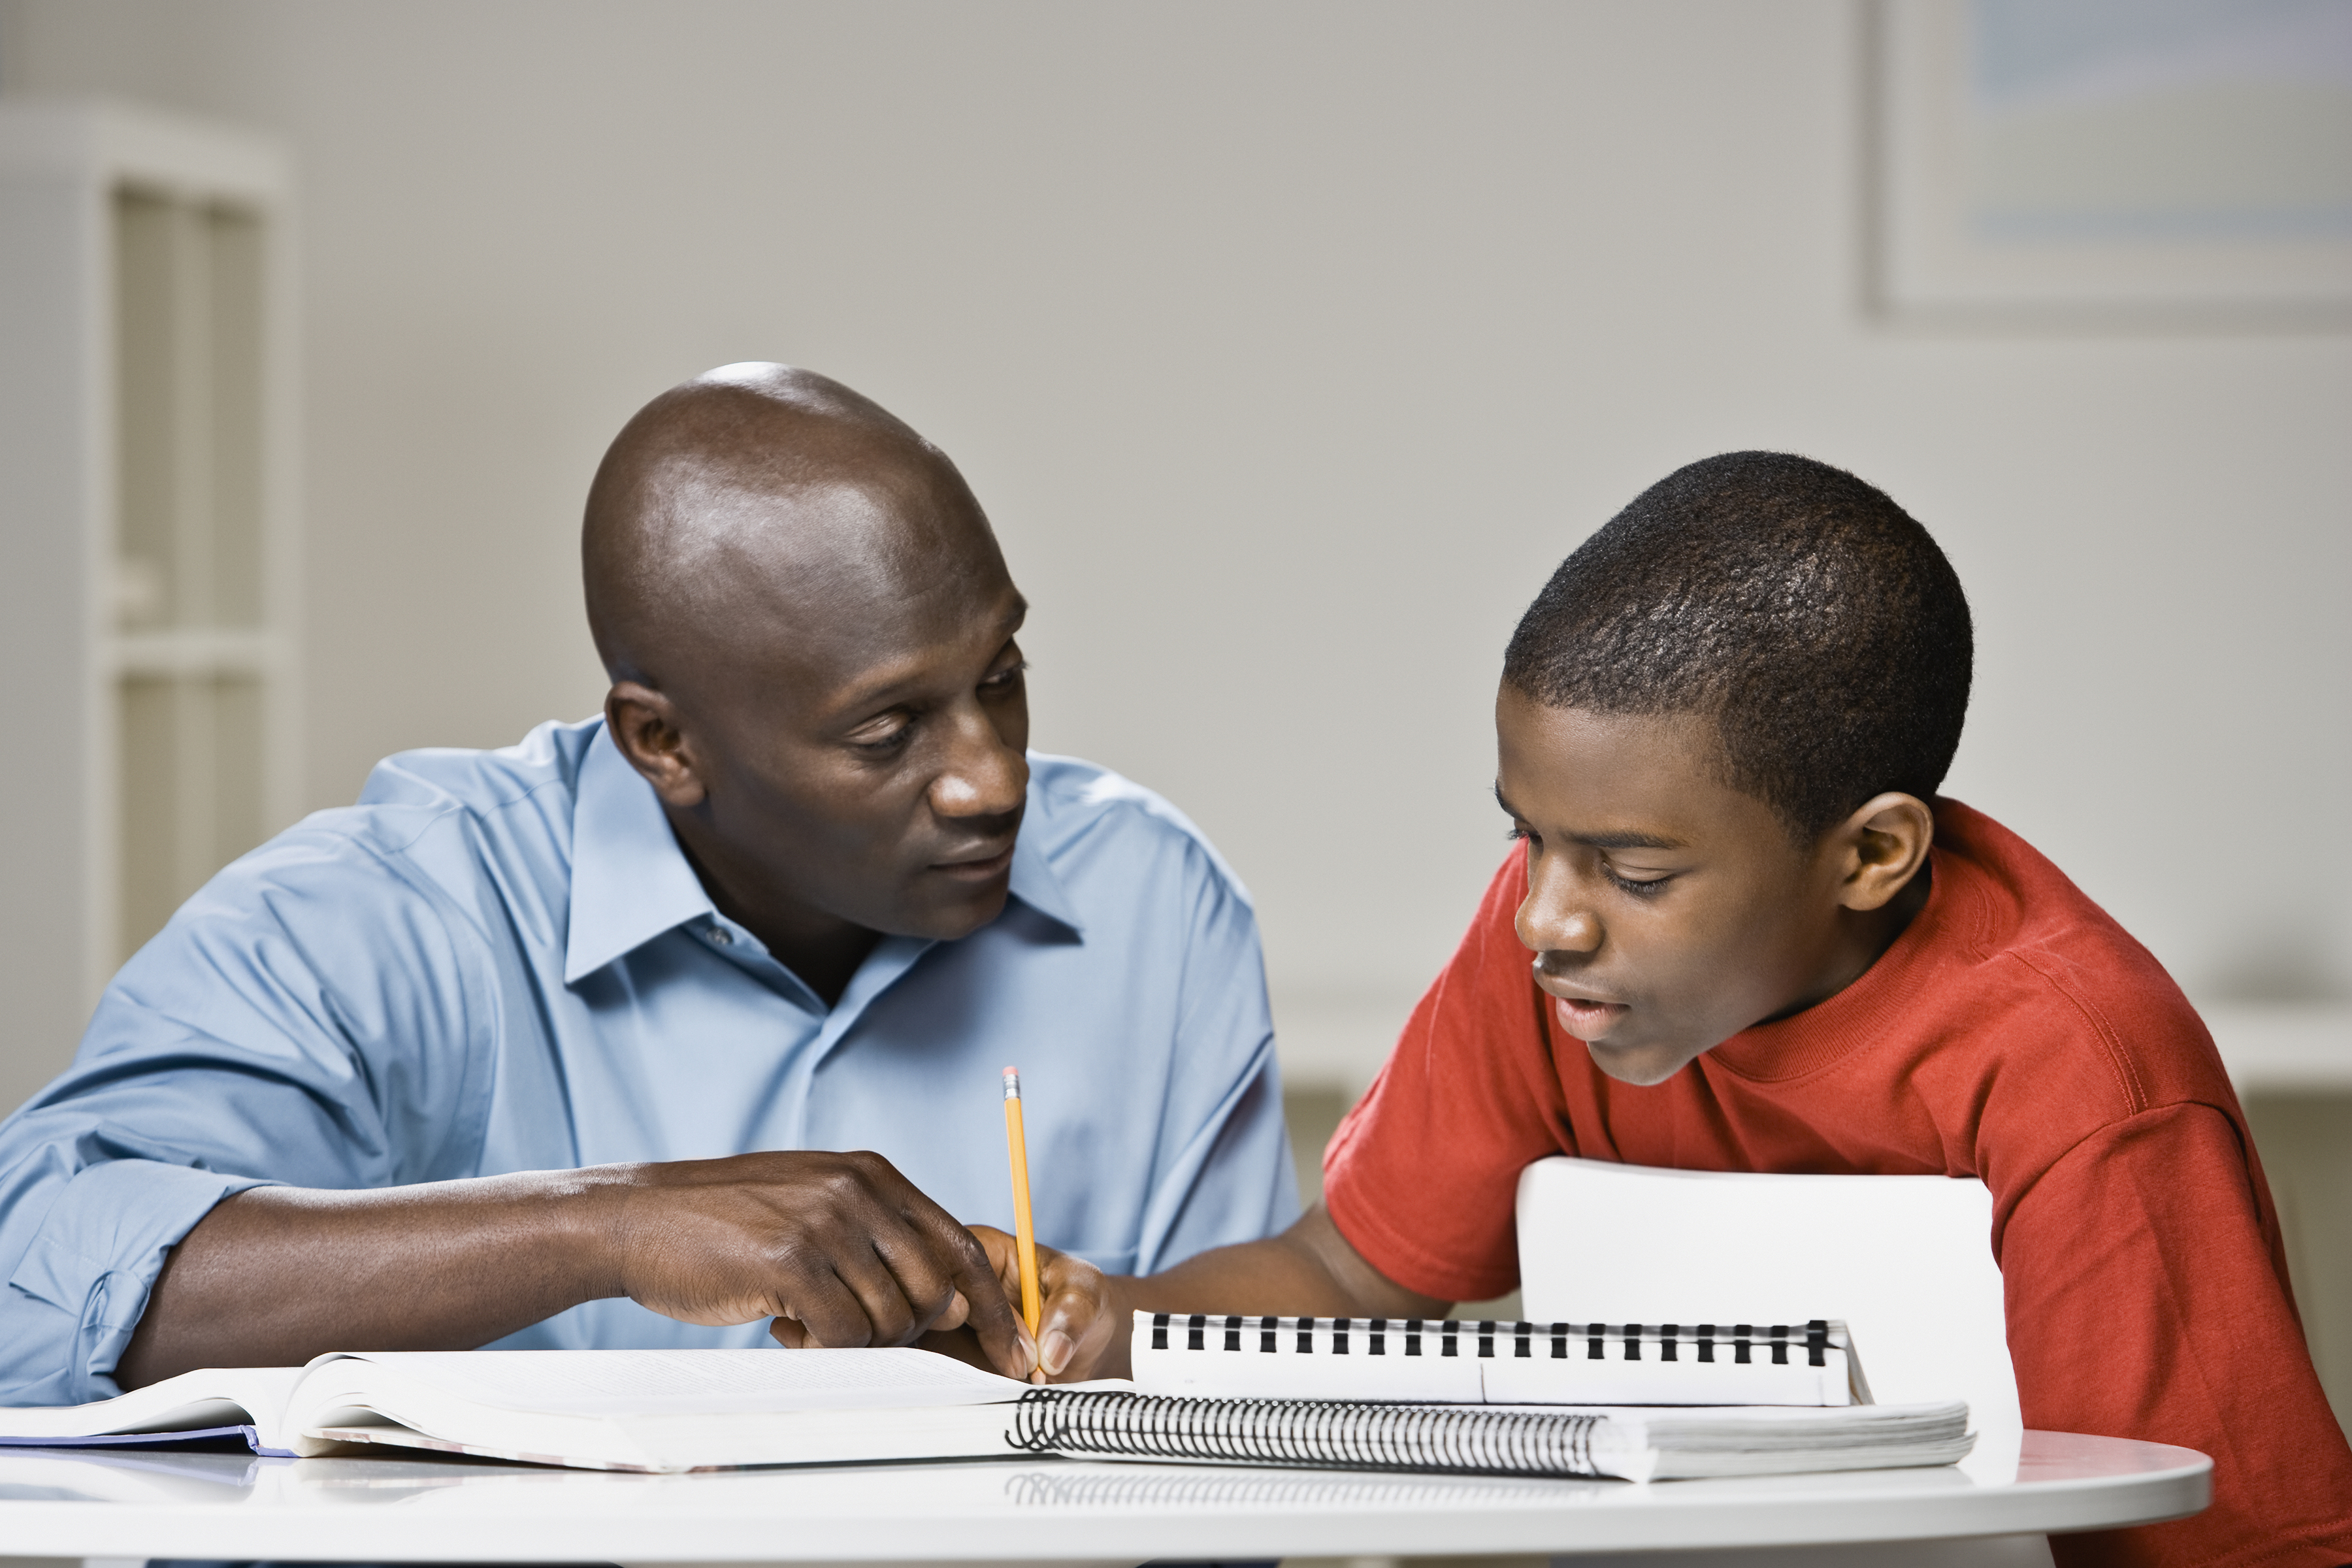 A new study finds that one size does not fit all students when it comes to parents helping with homework, and that parental involvement can be particularly beneficial for economically disadvantaged students. (Getty Images)